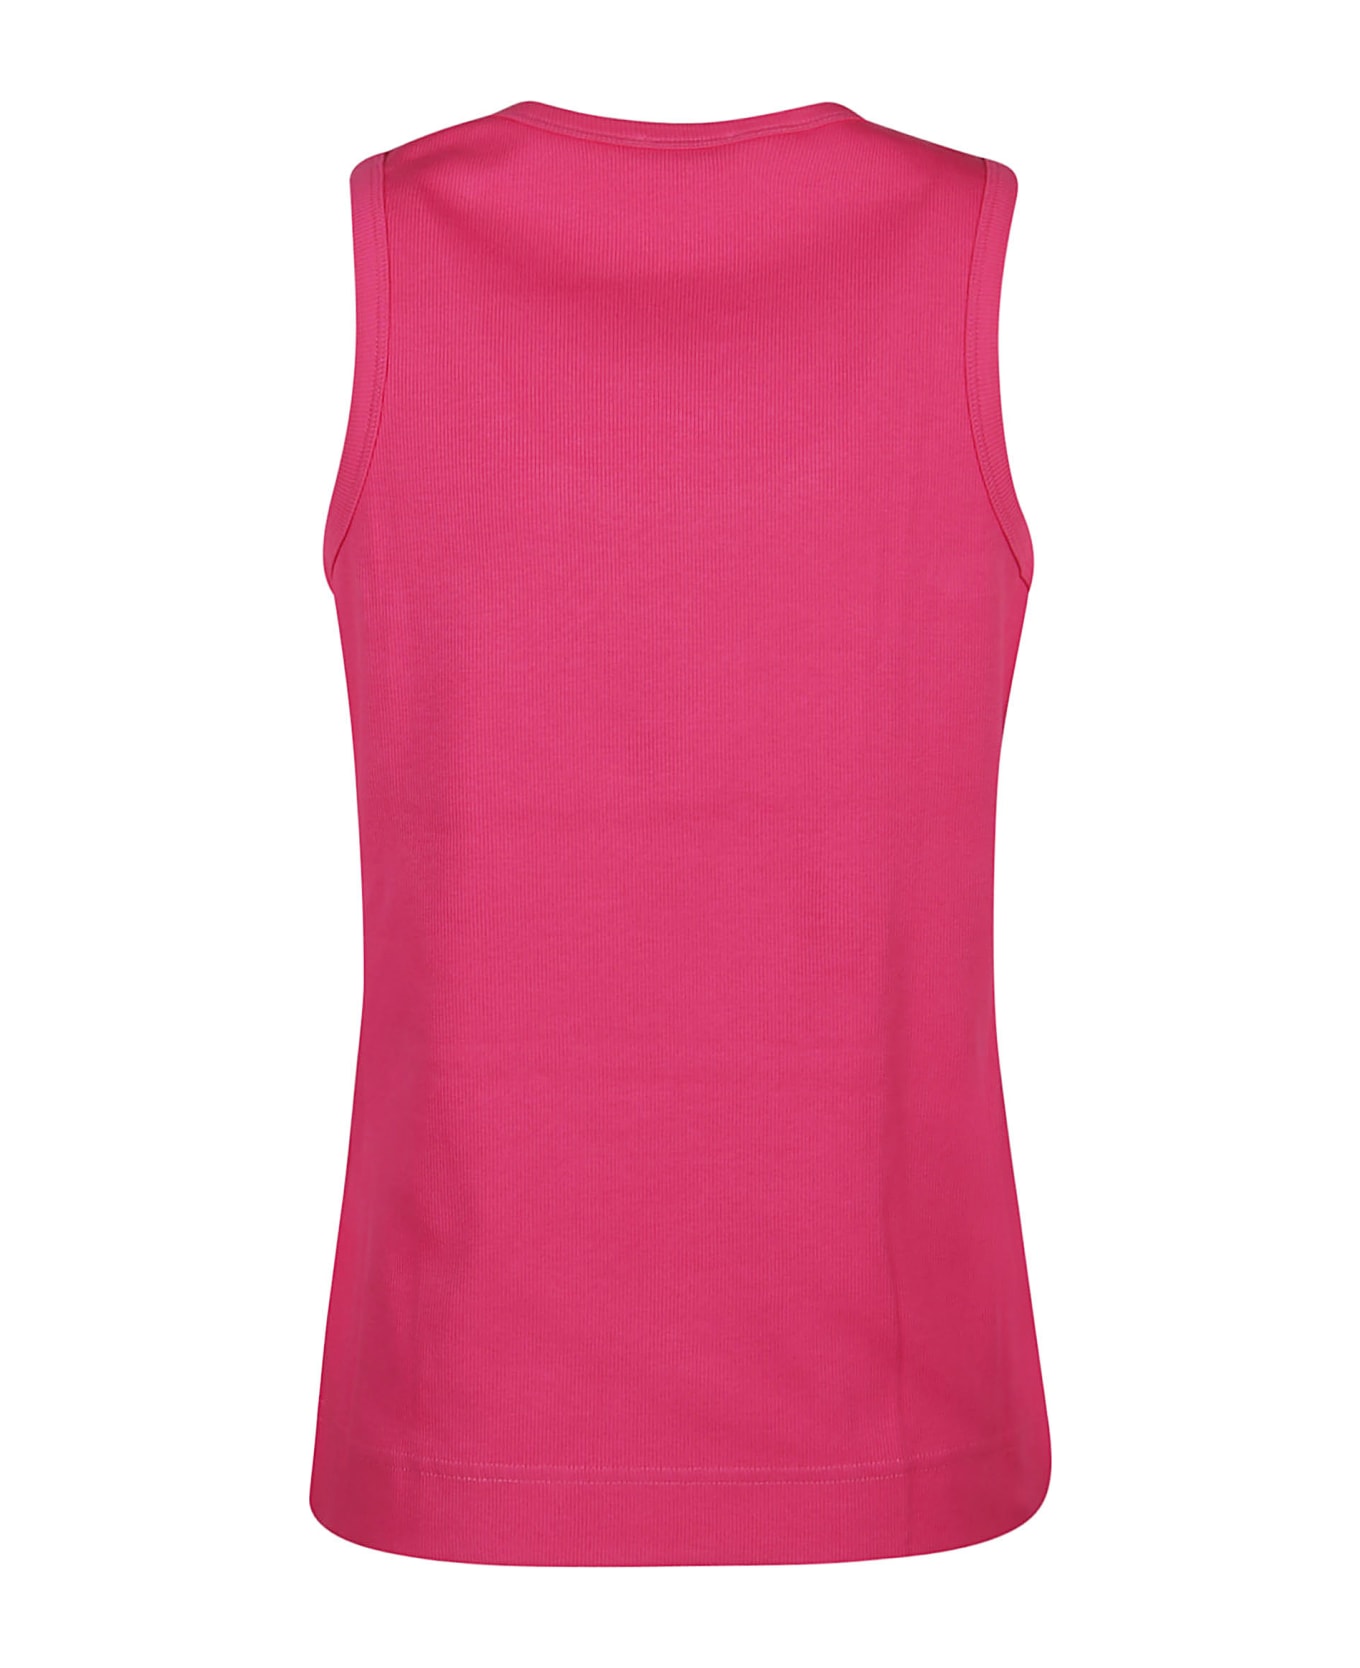 Moncler Tank Top - Rosso